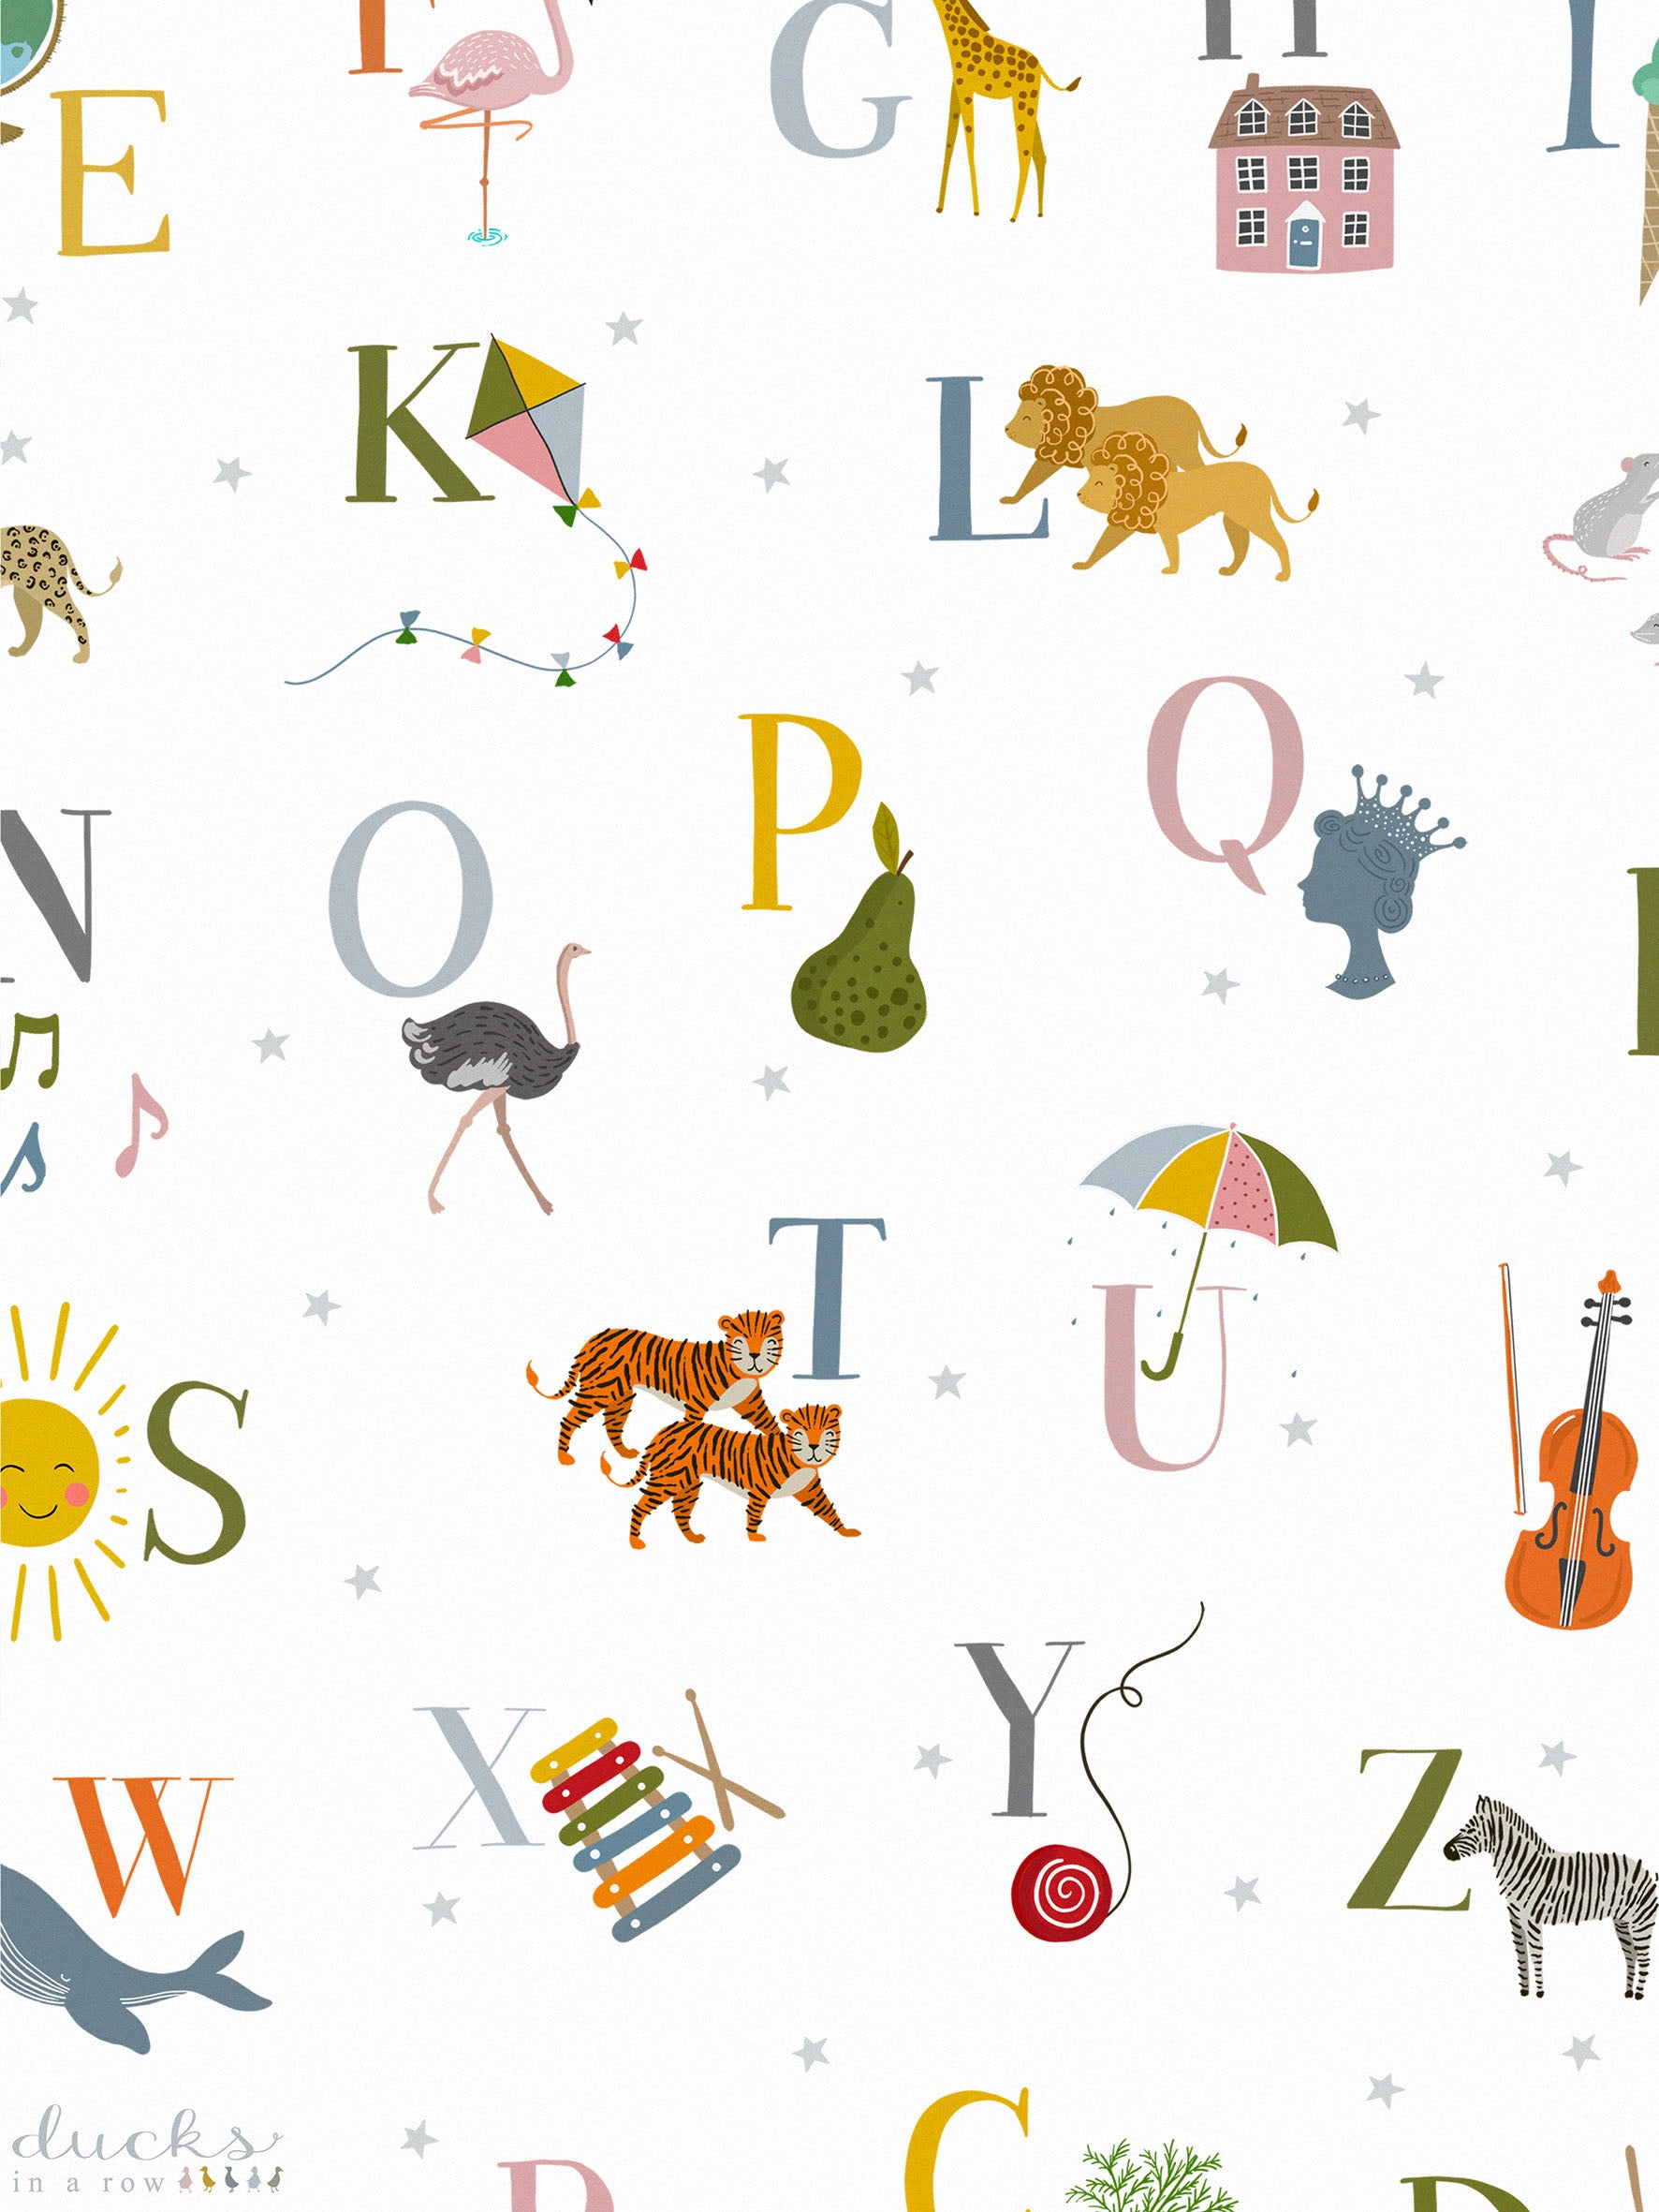 ABC Luxury Children's wallpaper with letters of the alphabet and illustrated icons